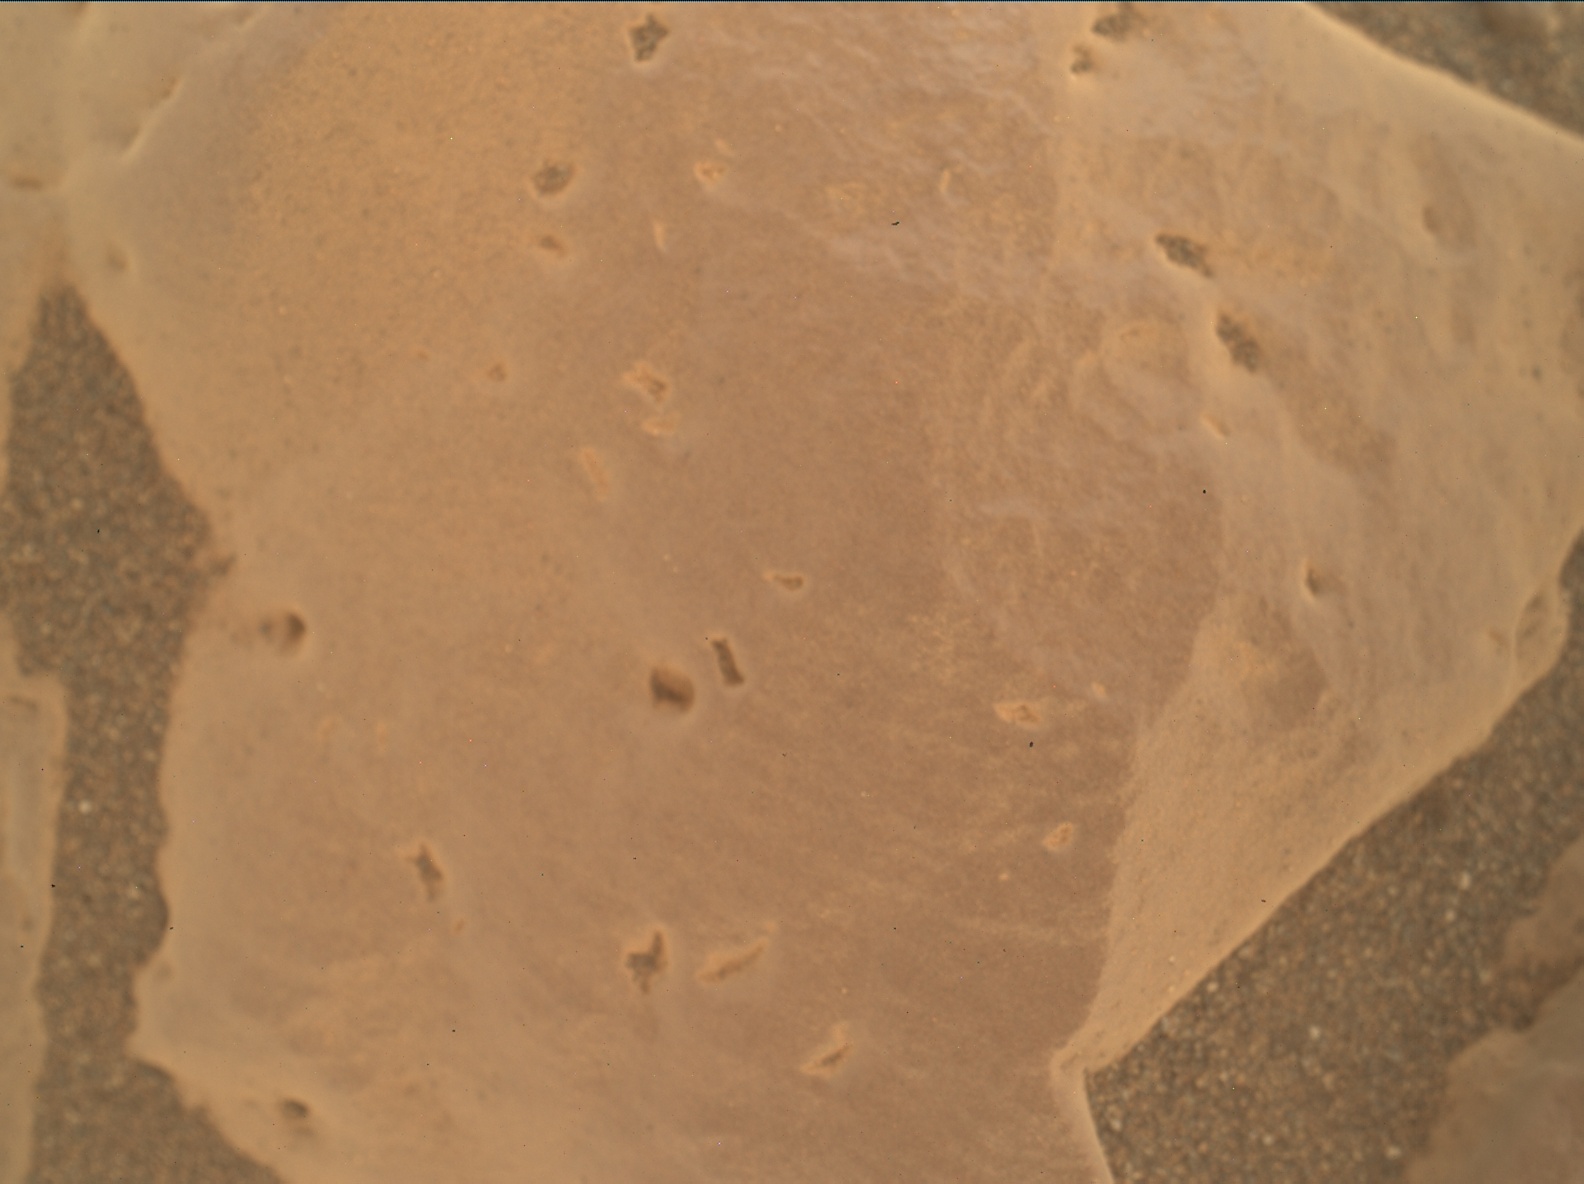 Nasa's Mars rover Curiosity acquired this image using its Mars Hand Lens Imager (MAHLI) on Sol 2449